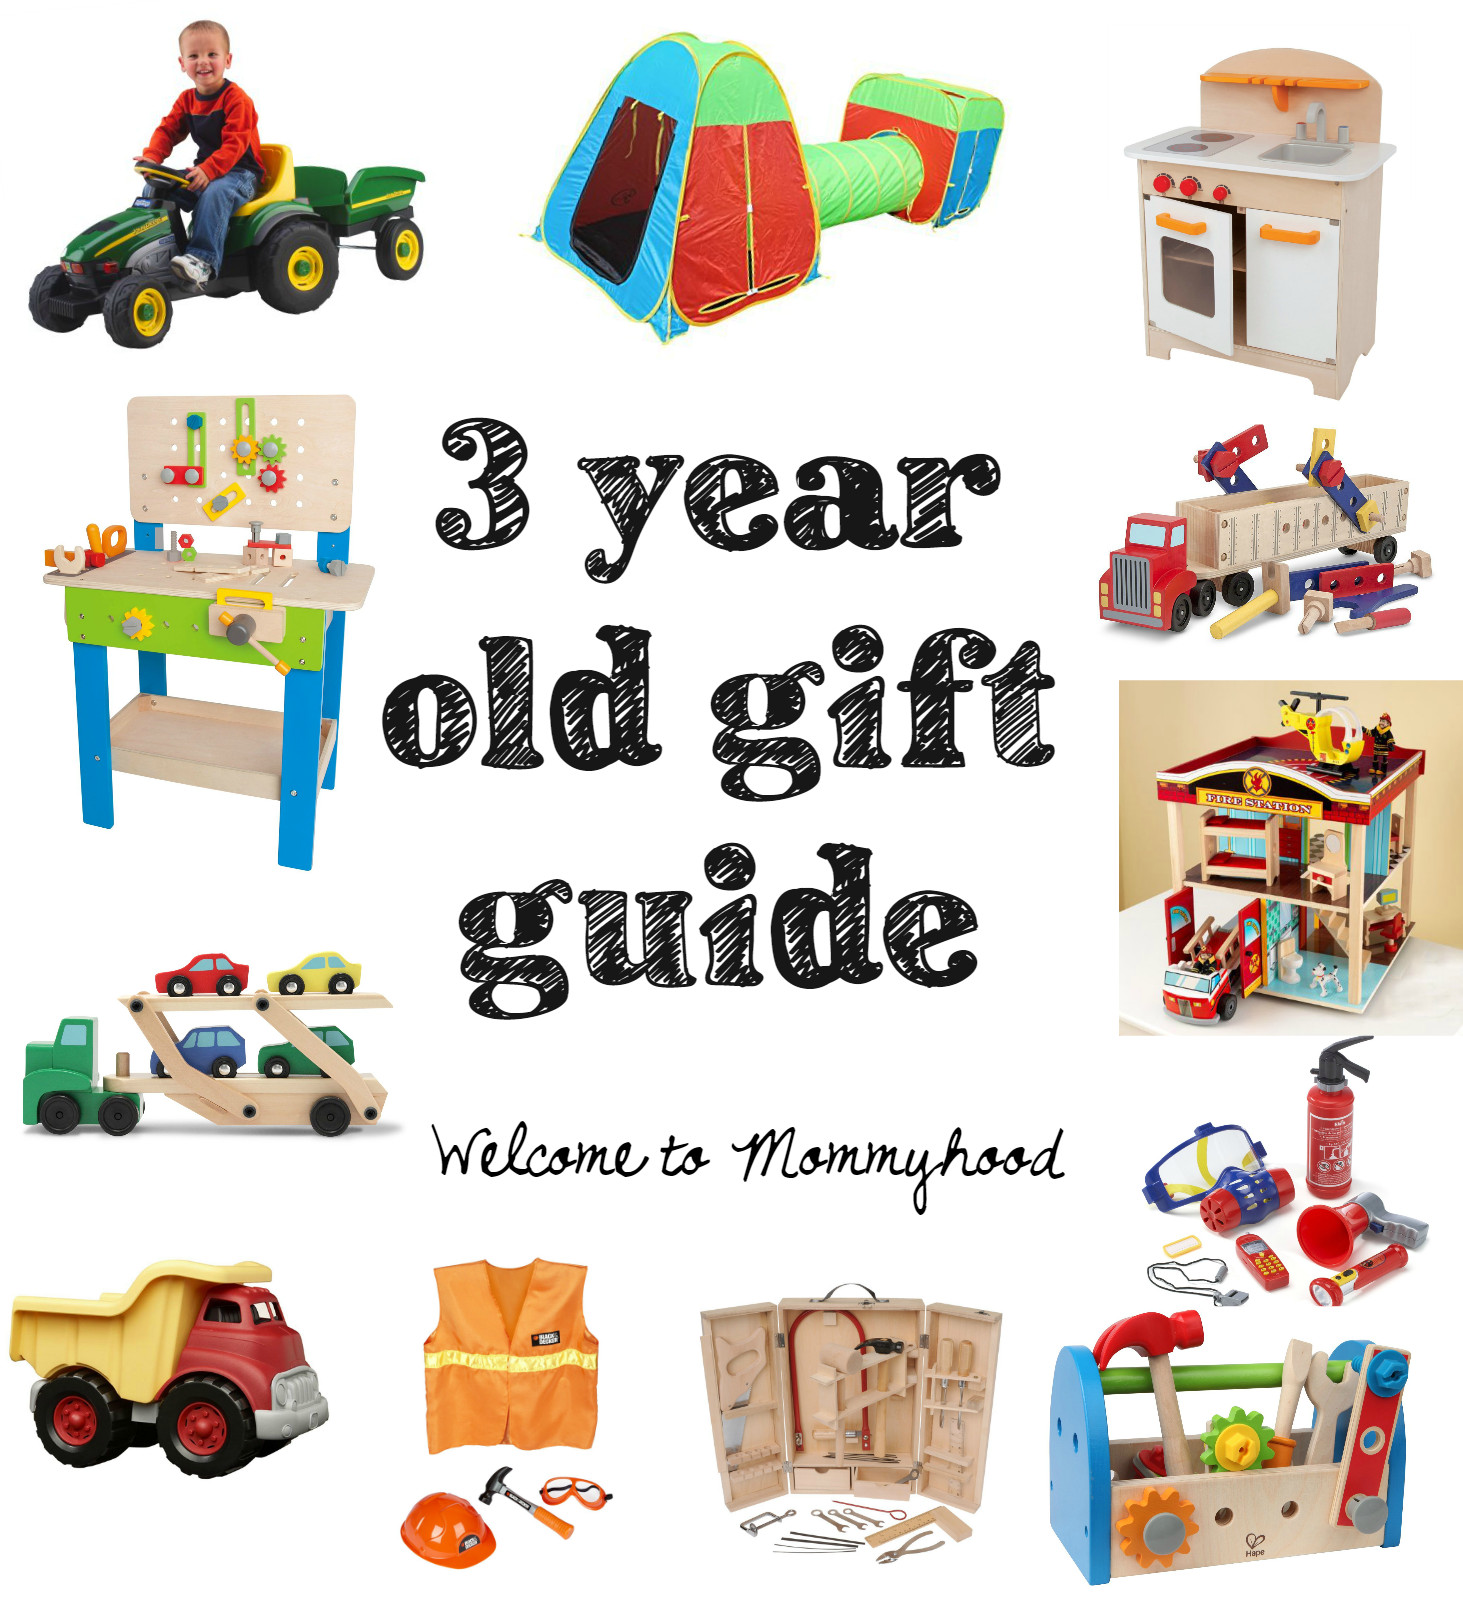 Gift Ideas For 3 Year Old Girls
 Gift Ideas For 3 Yr Old Girl